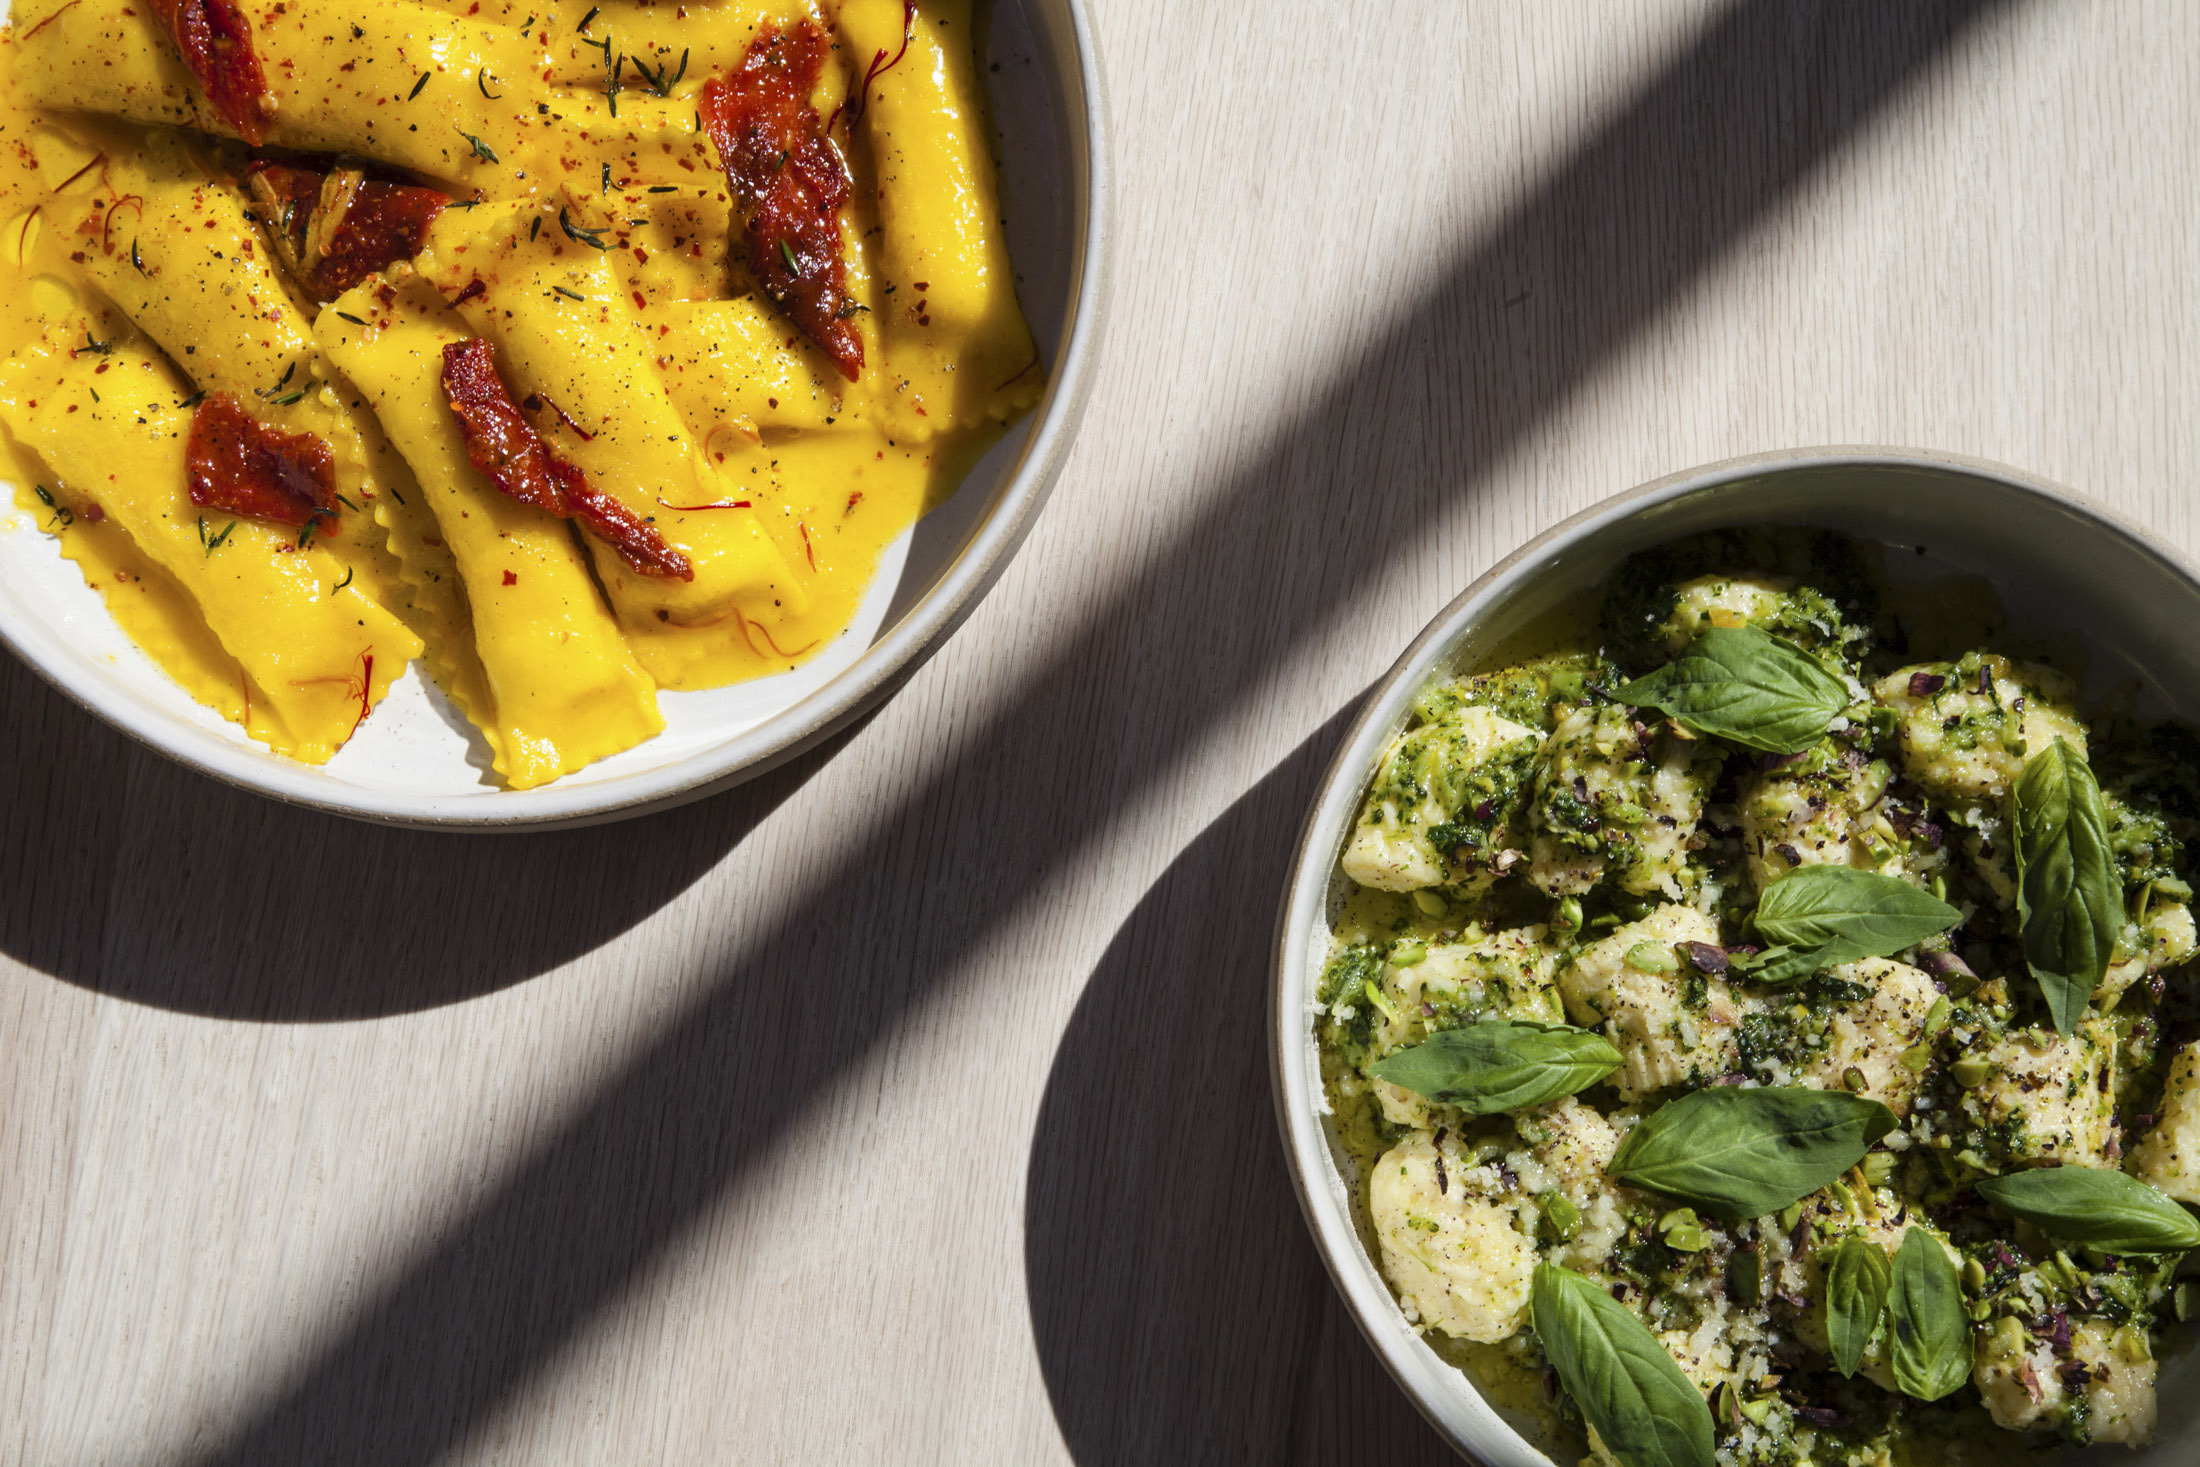 Lilia serves house-made pastas such as&nbsp;sheep's milk cheese agnolotti in saffron butter and ricotta gnocchi in a broccoli.